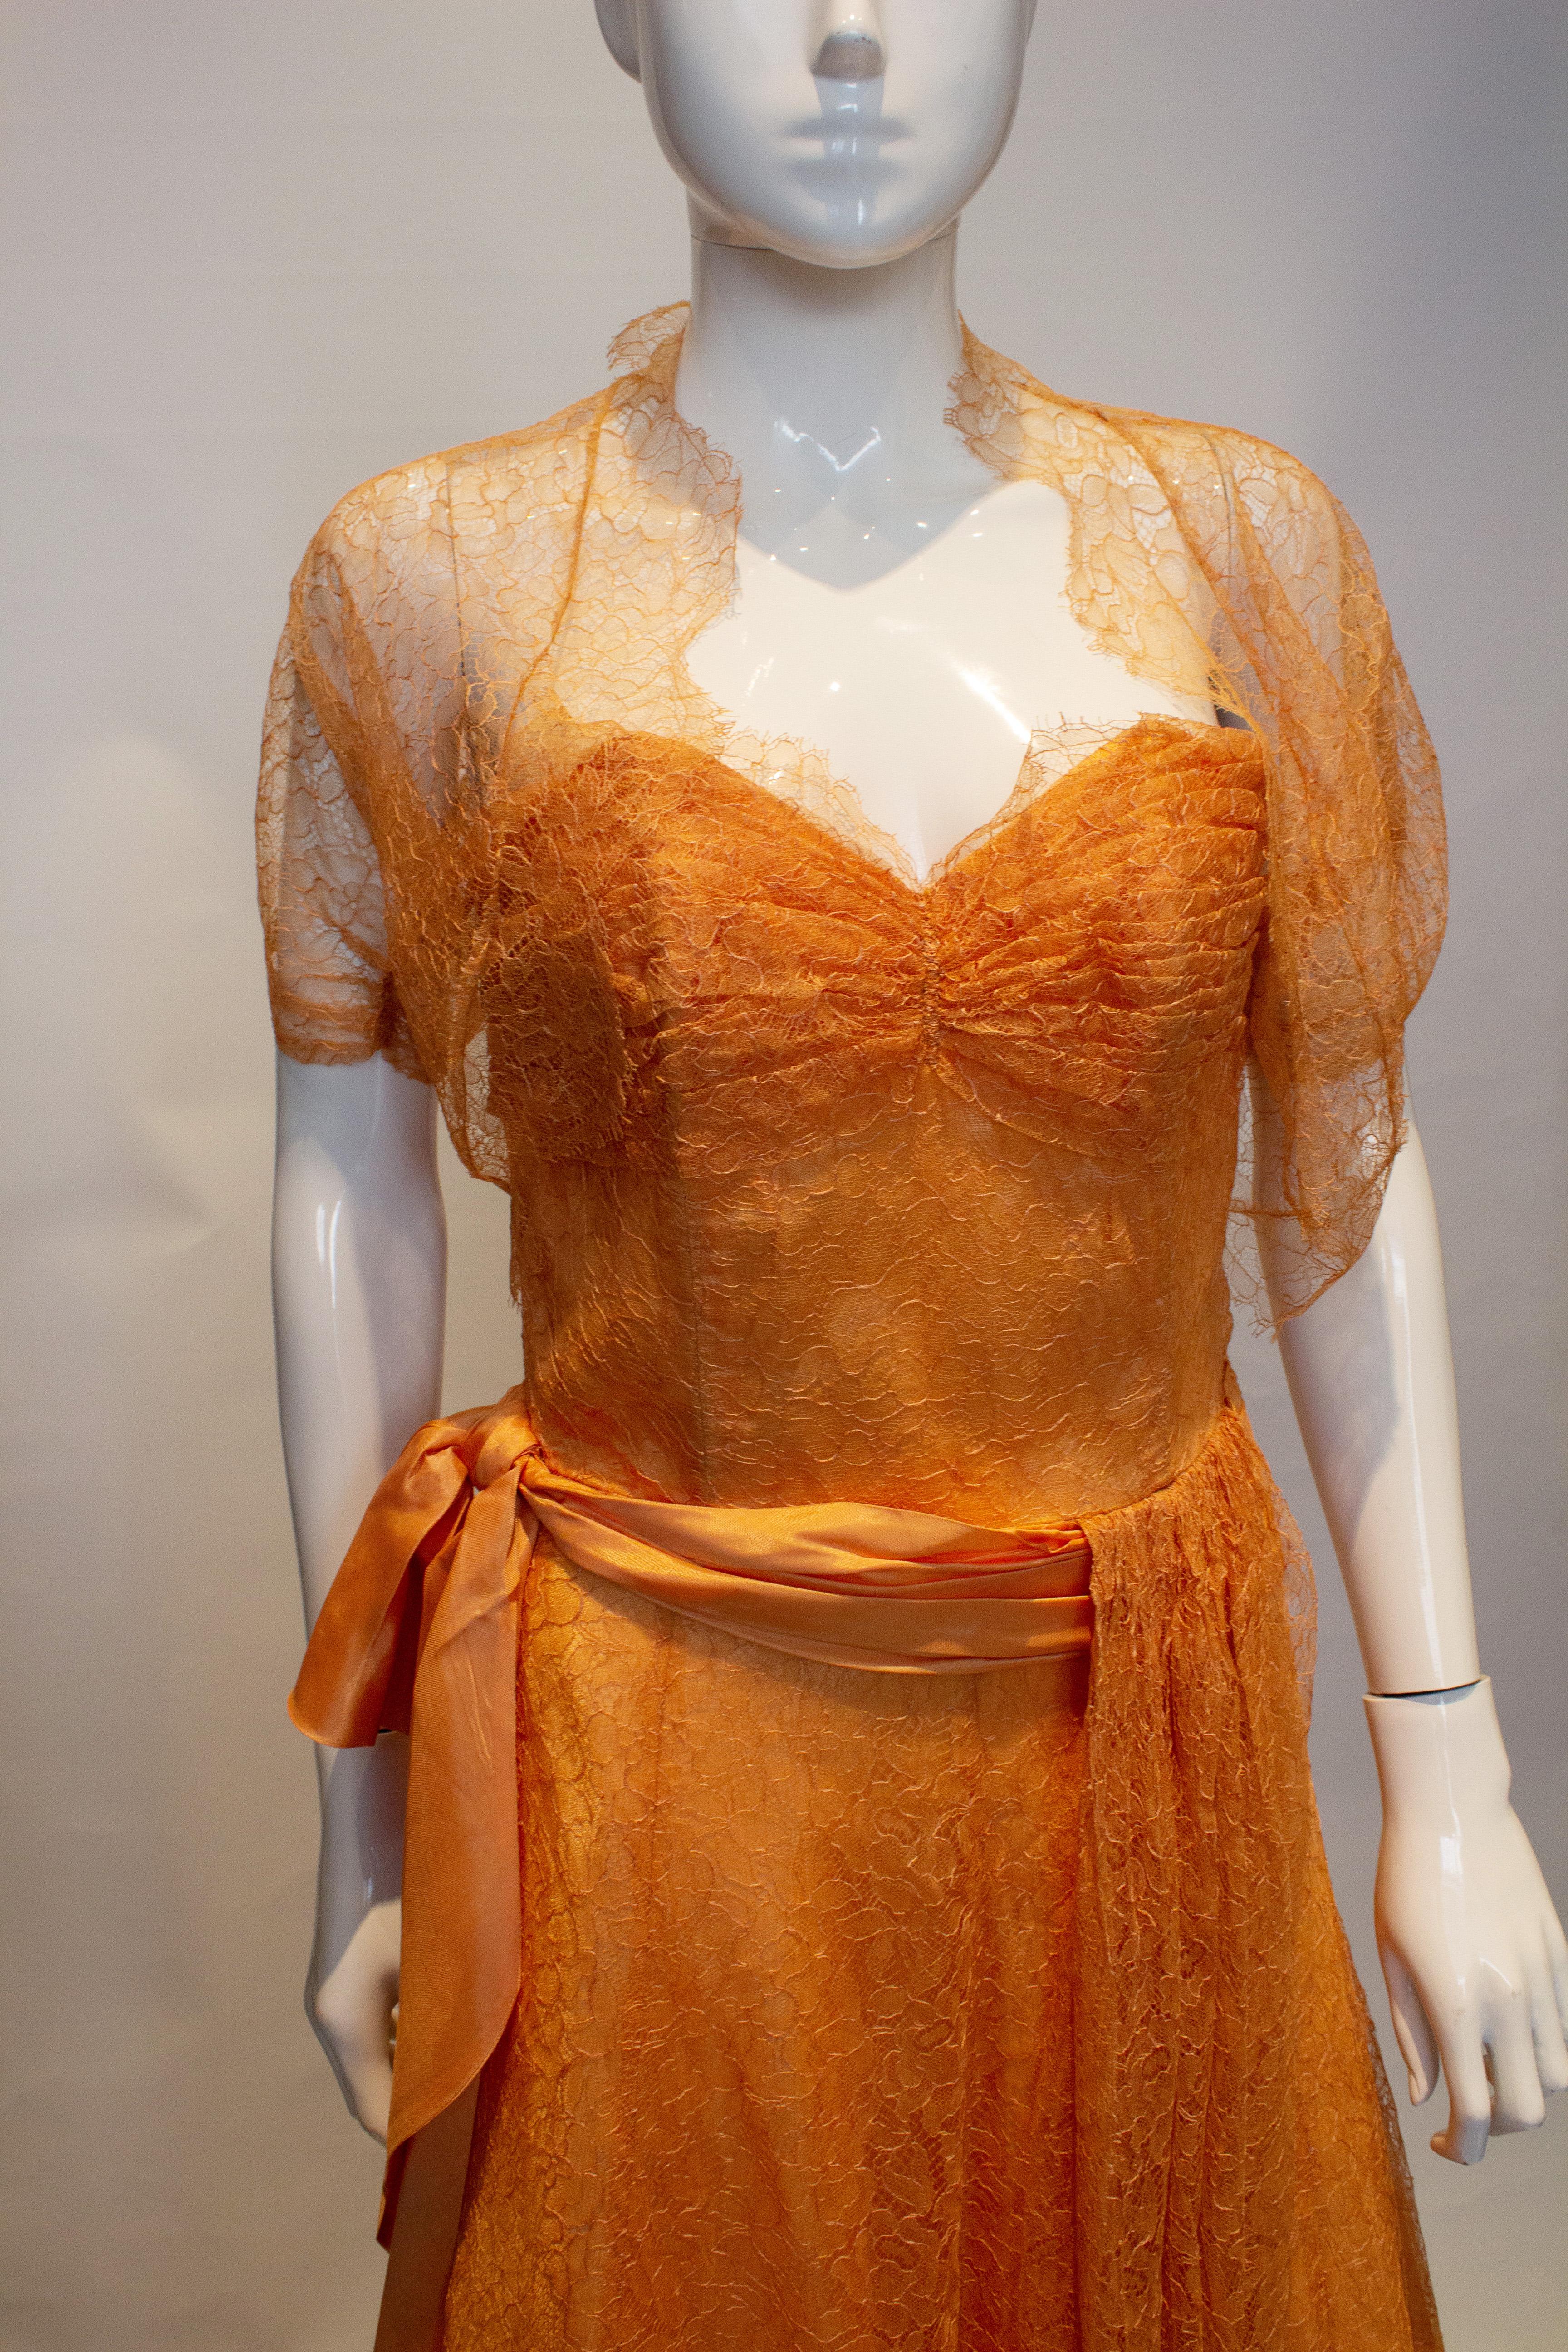 A pretty vintage dress in apricot colour lace  with a matching bolero. The dress is strapless with boning in the bodice and a side zip. It has a wide ribbon belt and a lace drape.
Measurements: Dress bust 36'', waist 28'', length 48''', Bolero bust